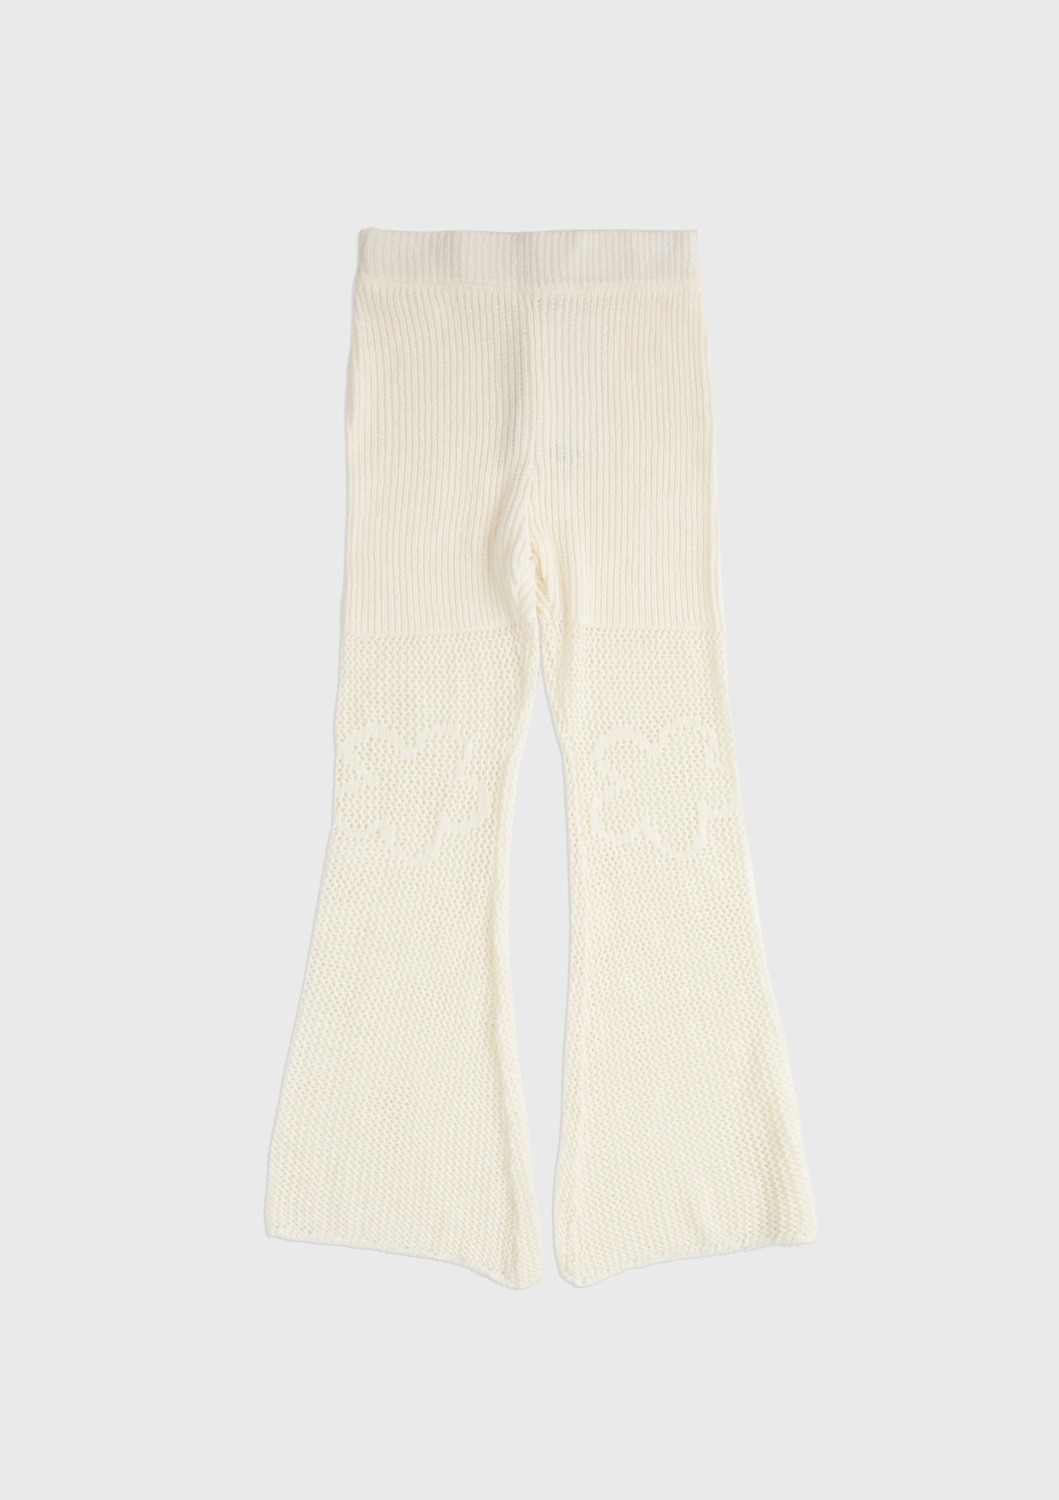 Mused Crochet Knit Pants - White